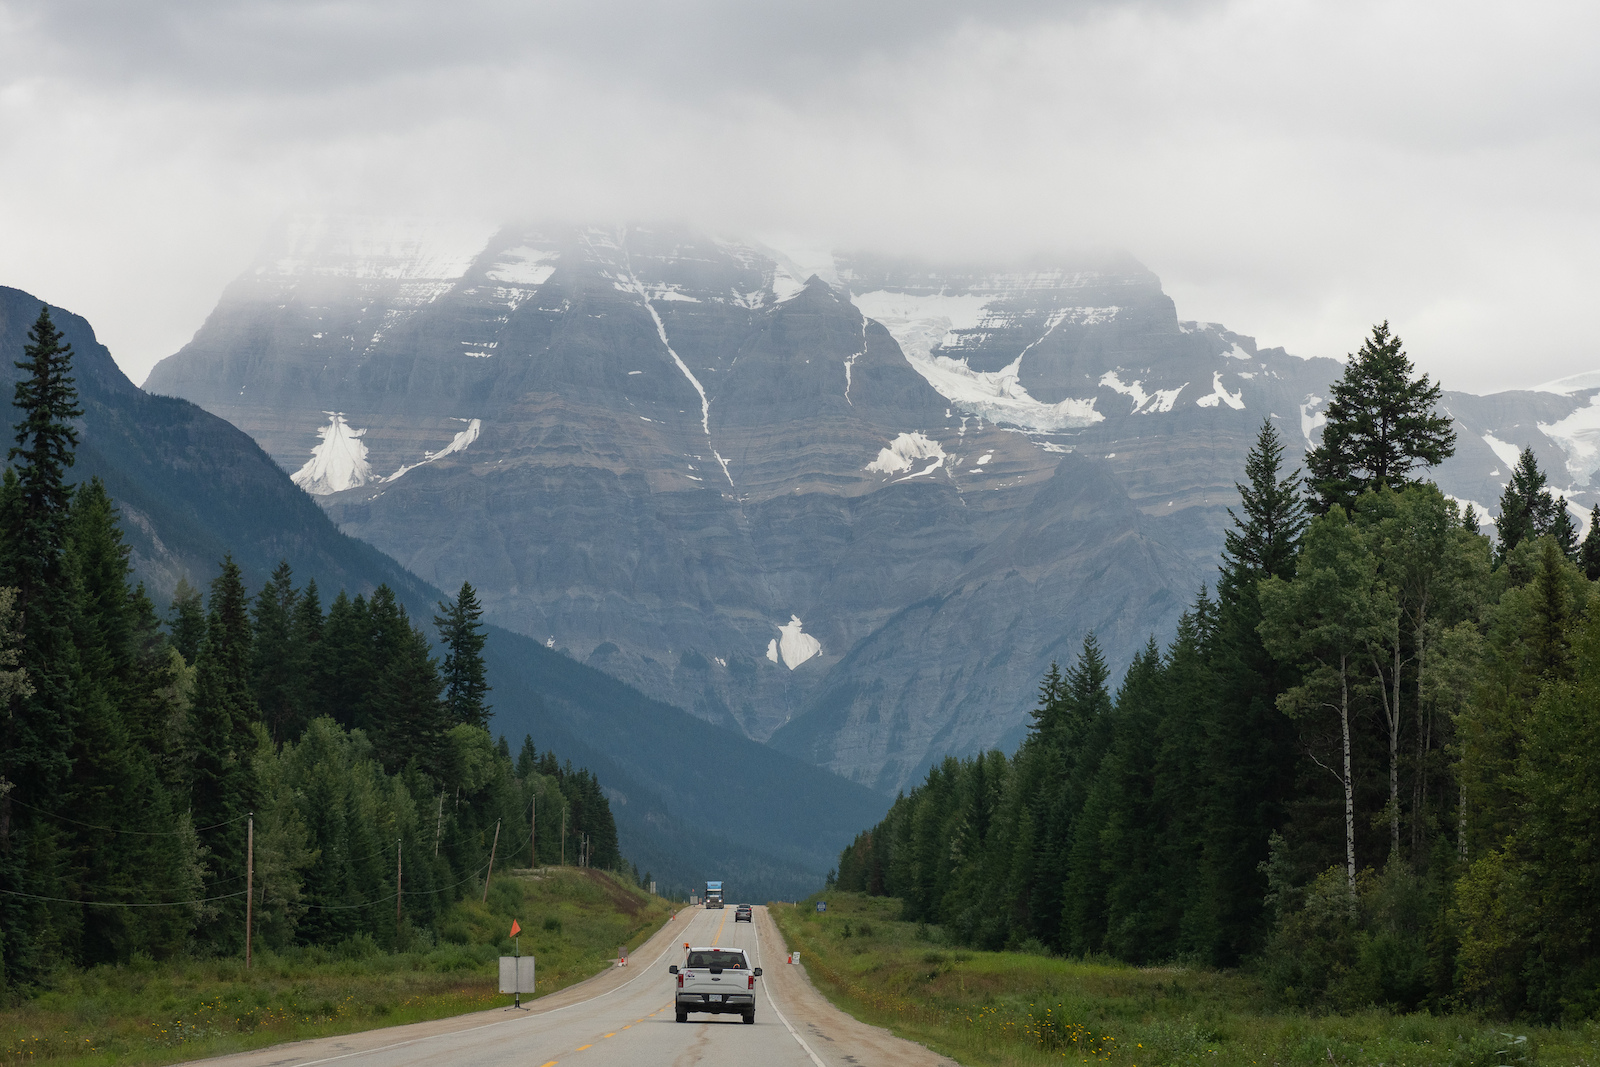 The imposing view of Mt. Robson - the highest peak in the Canadian Rockies